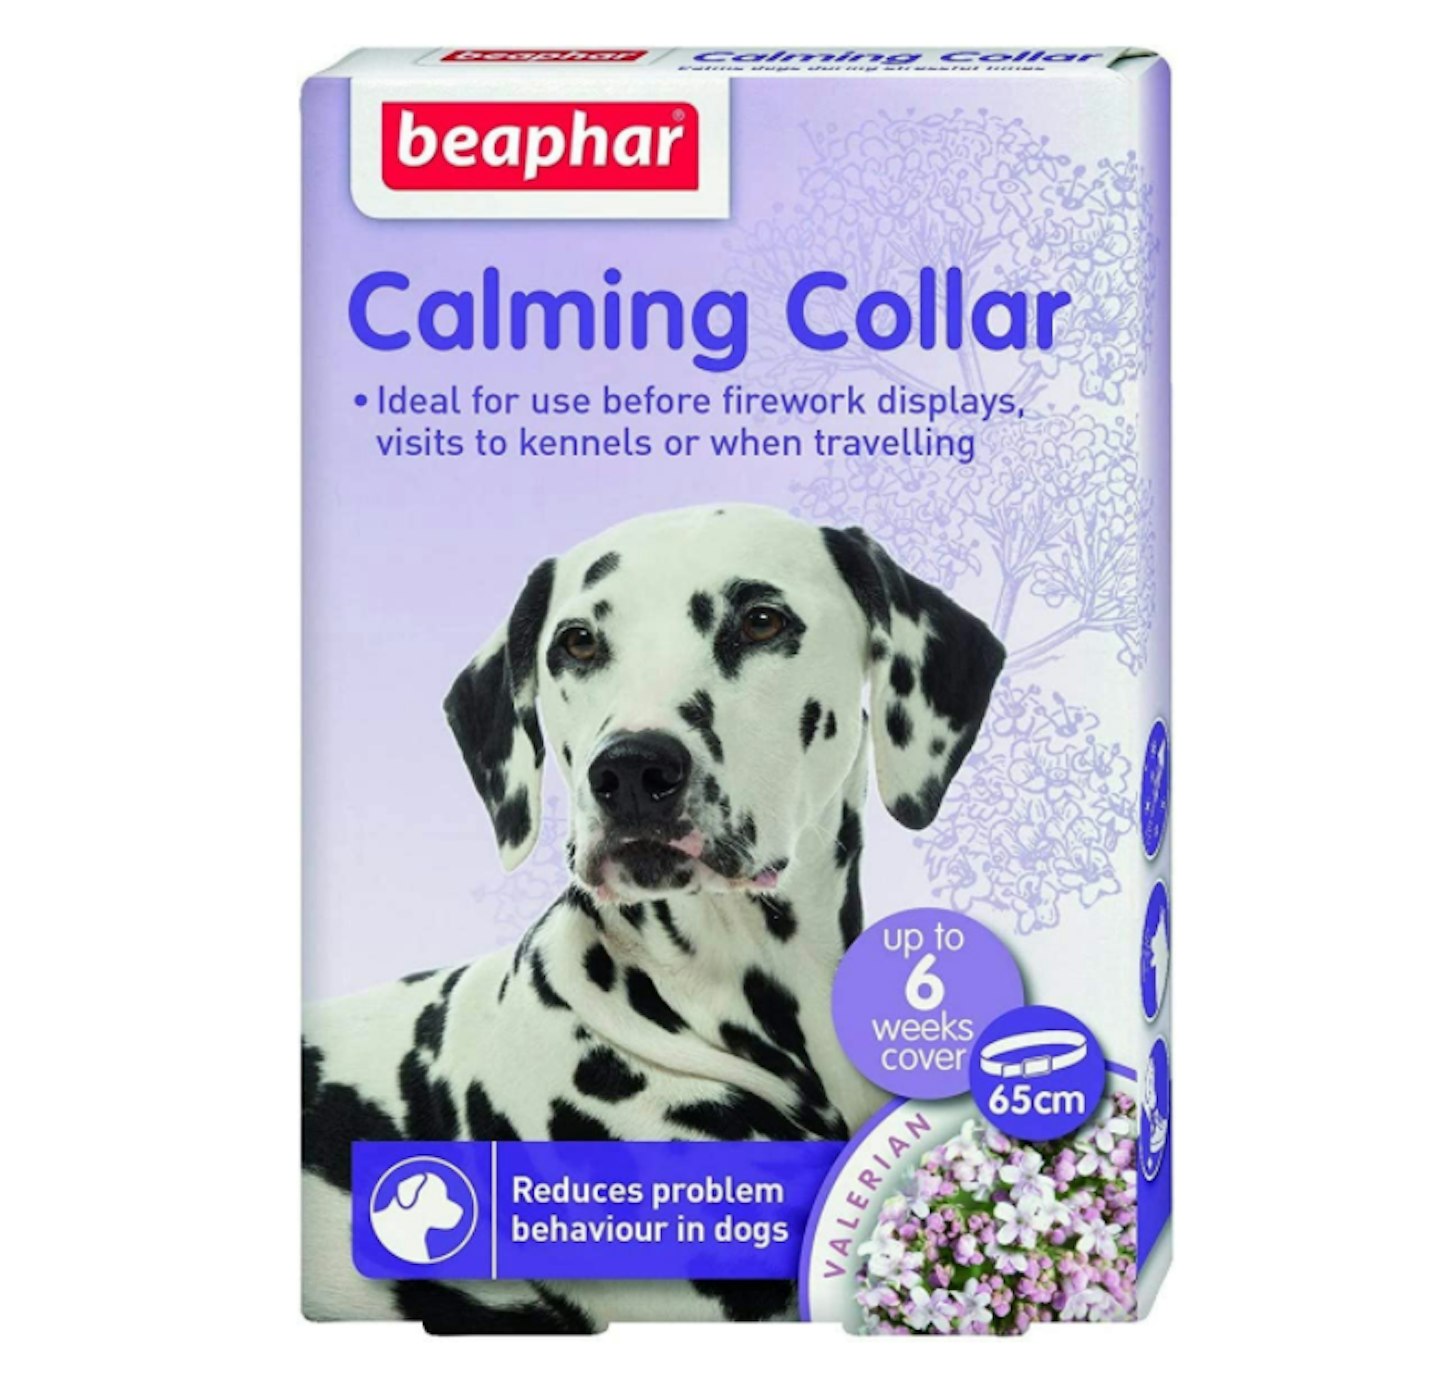 Beaphar Calming Collar for Cats and Dogs